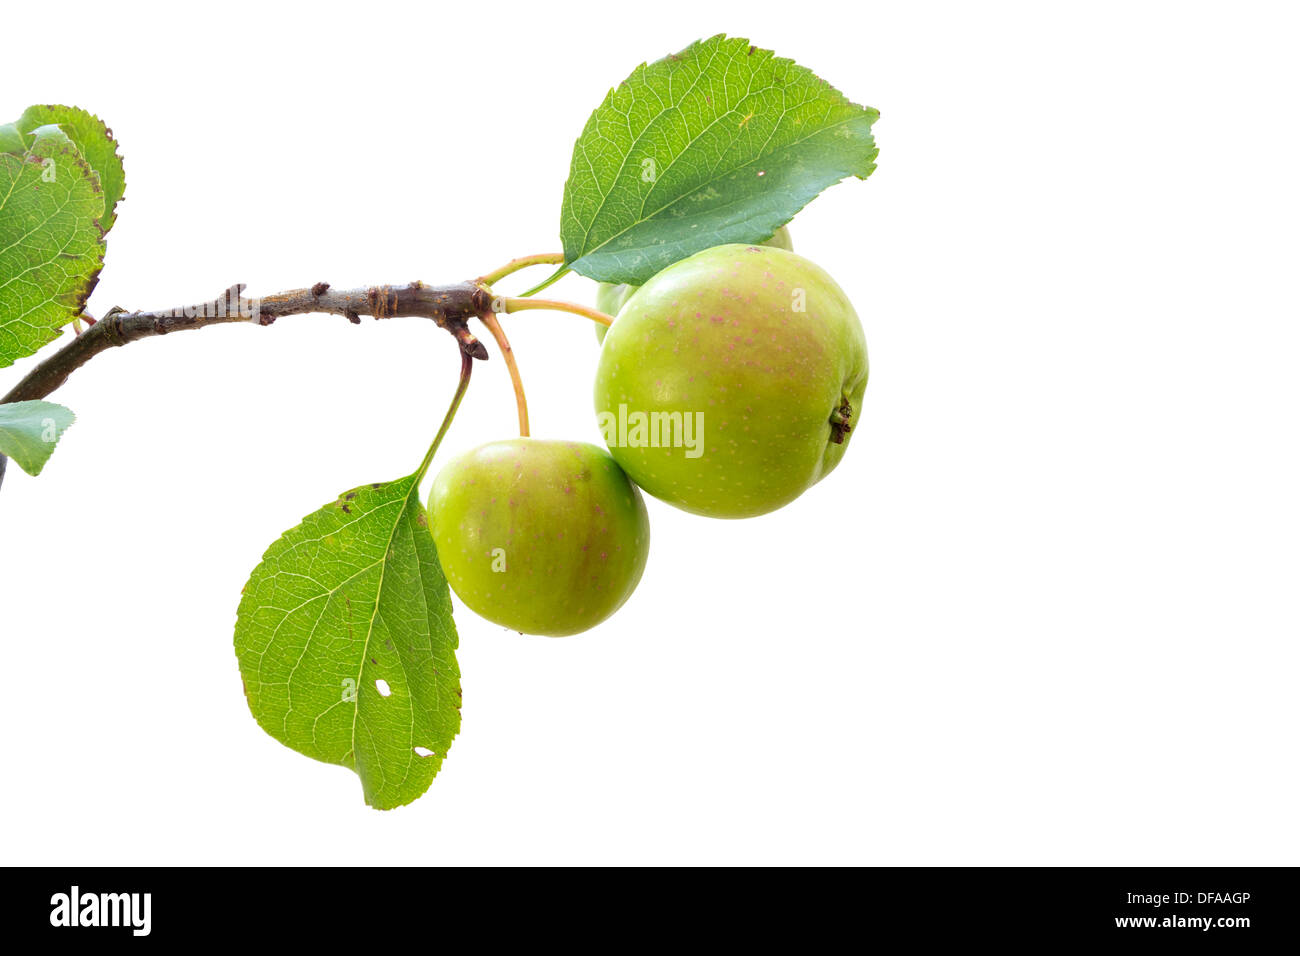 Cut Out of Crab Apple Malus sylvestris Fruit on Branch UK Stock Photo